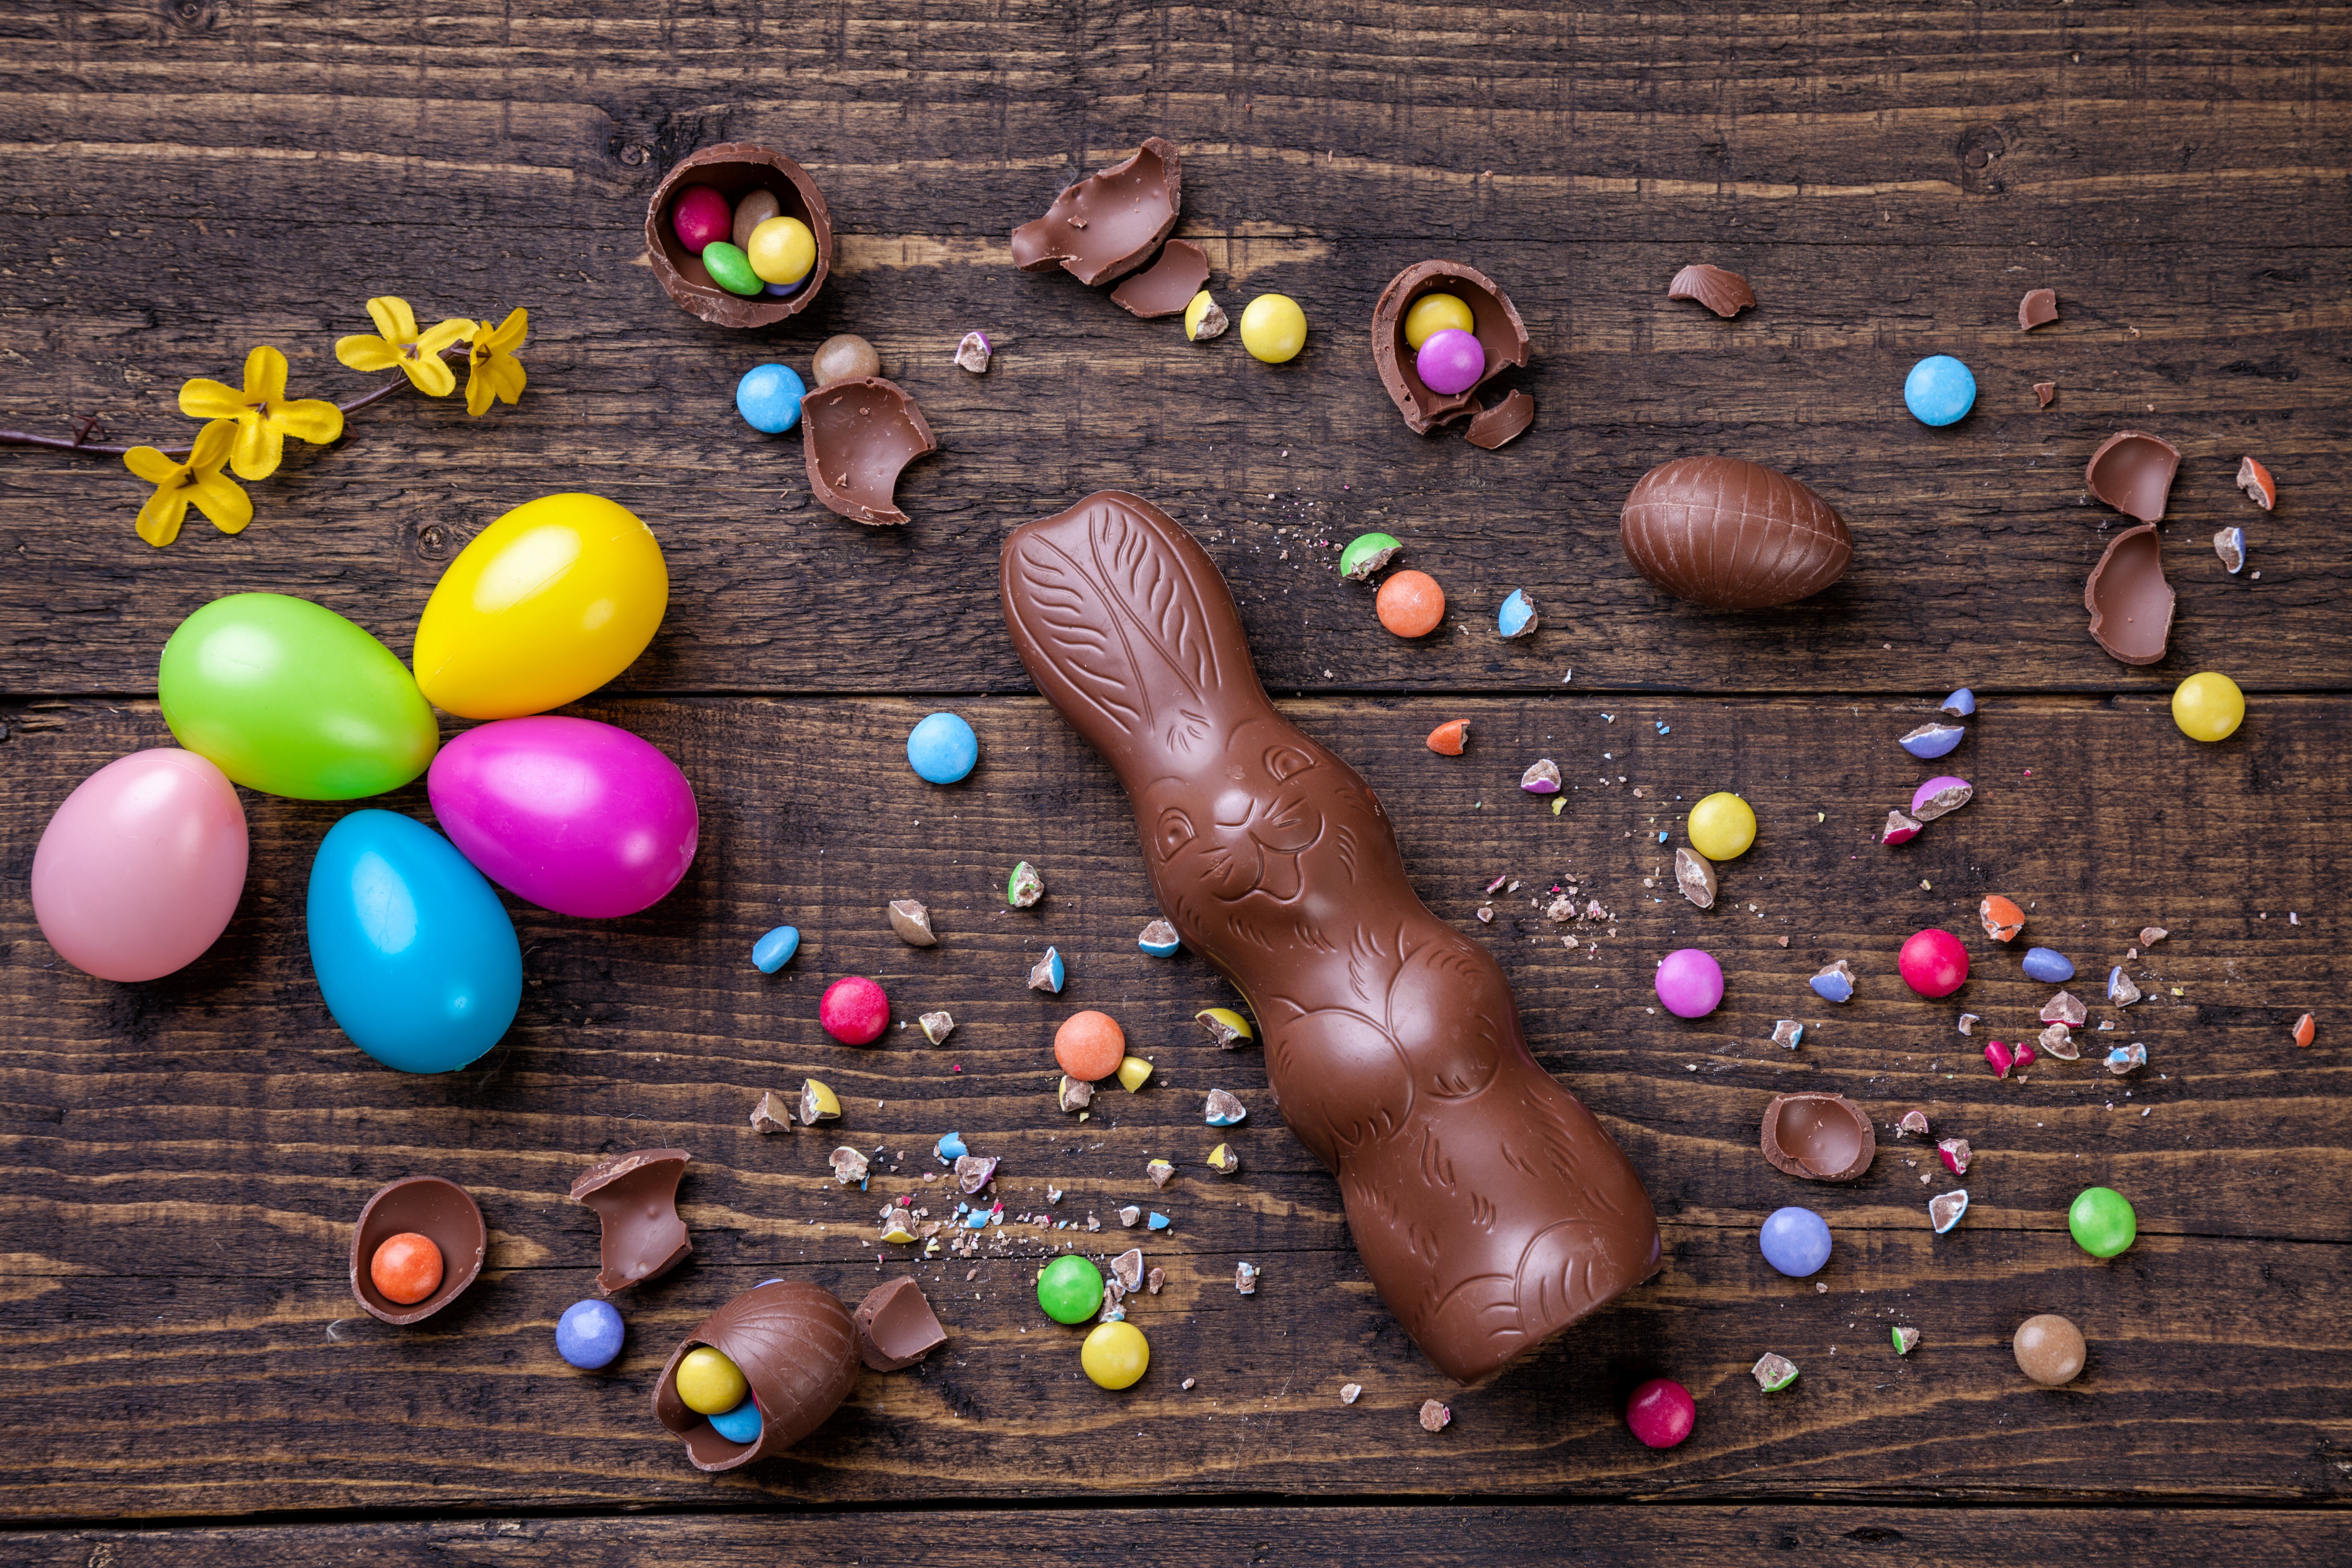 Chocolate Easter Egg Candy Still Life 5616x3744